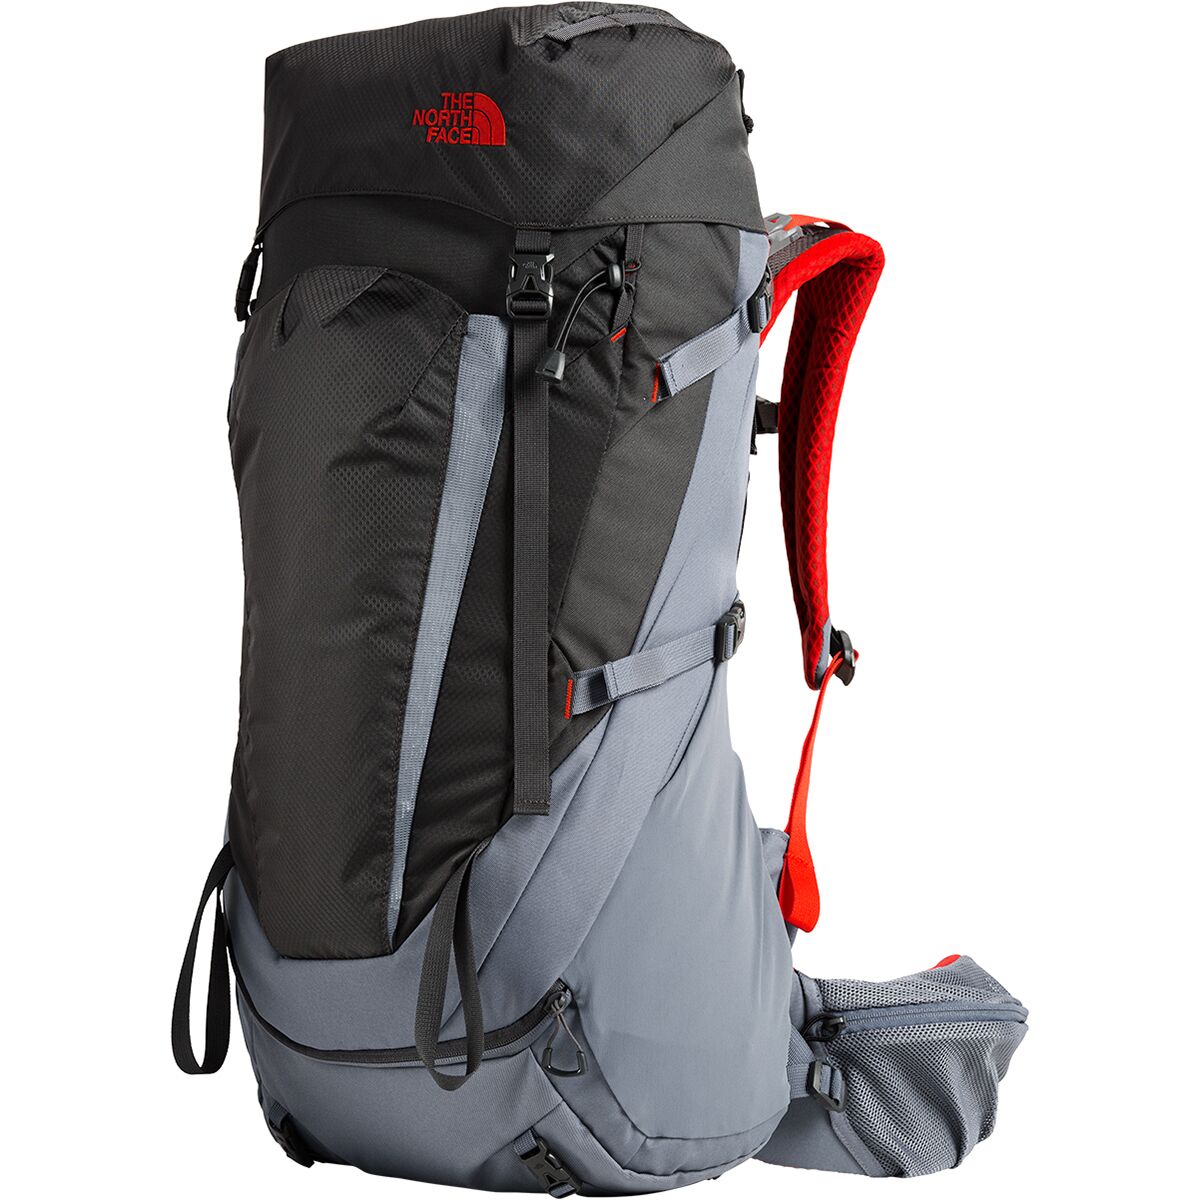 what is the smallest north face backpack